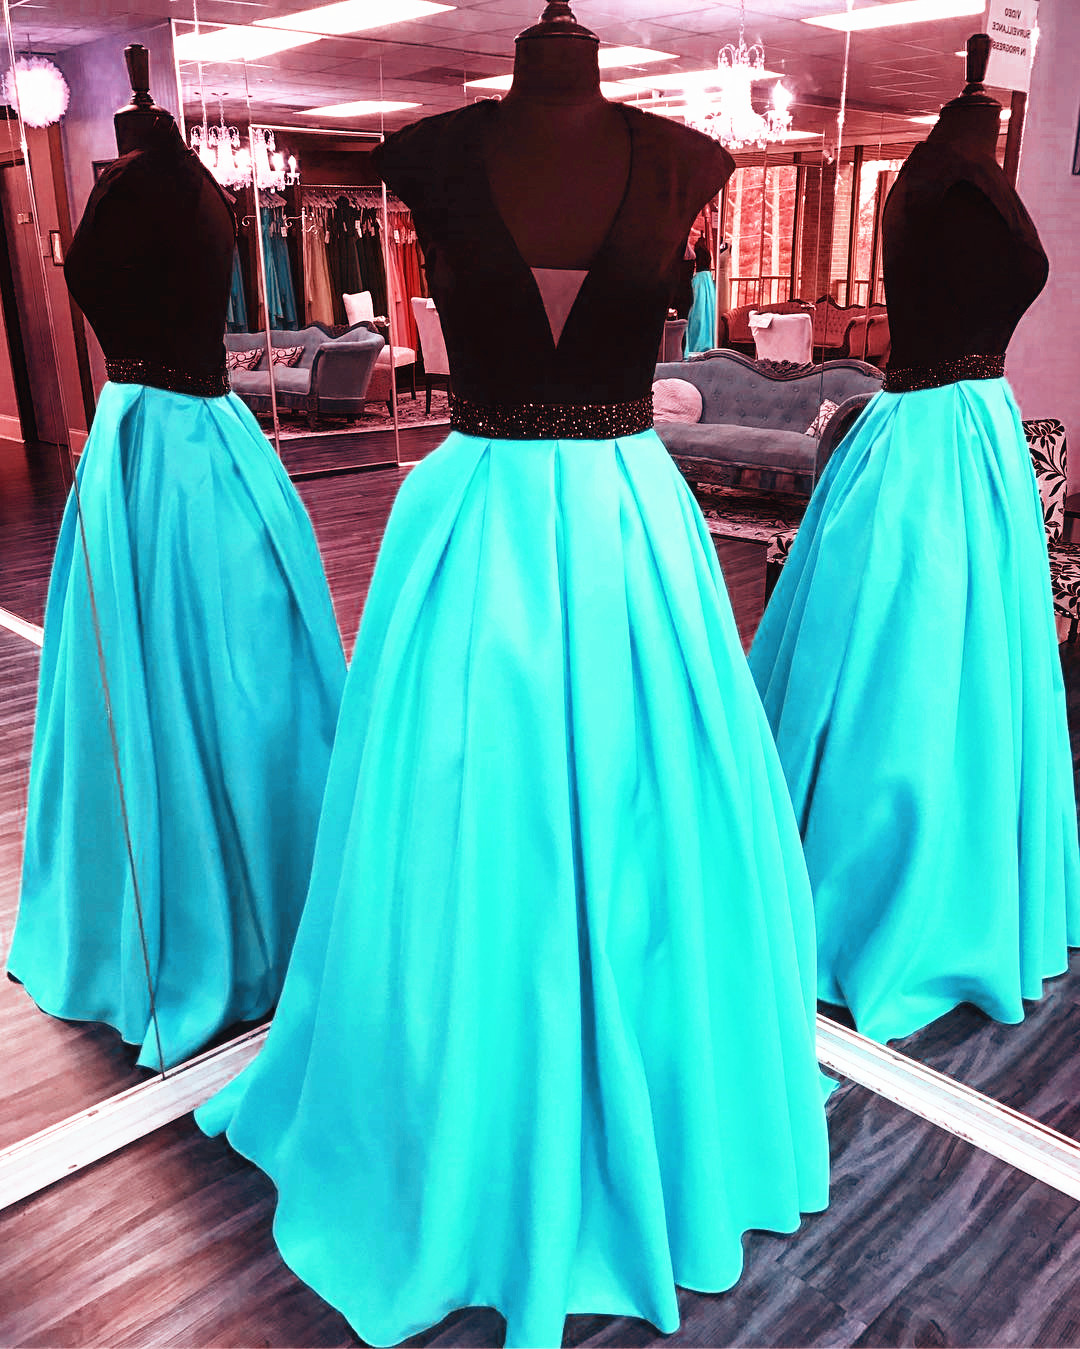 Turquoise Prom Dresses,long Prom Gowns,long Formal Dresses,women's Evening Gowns,prom Dresses 2017